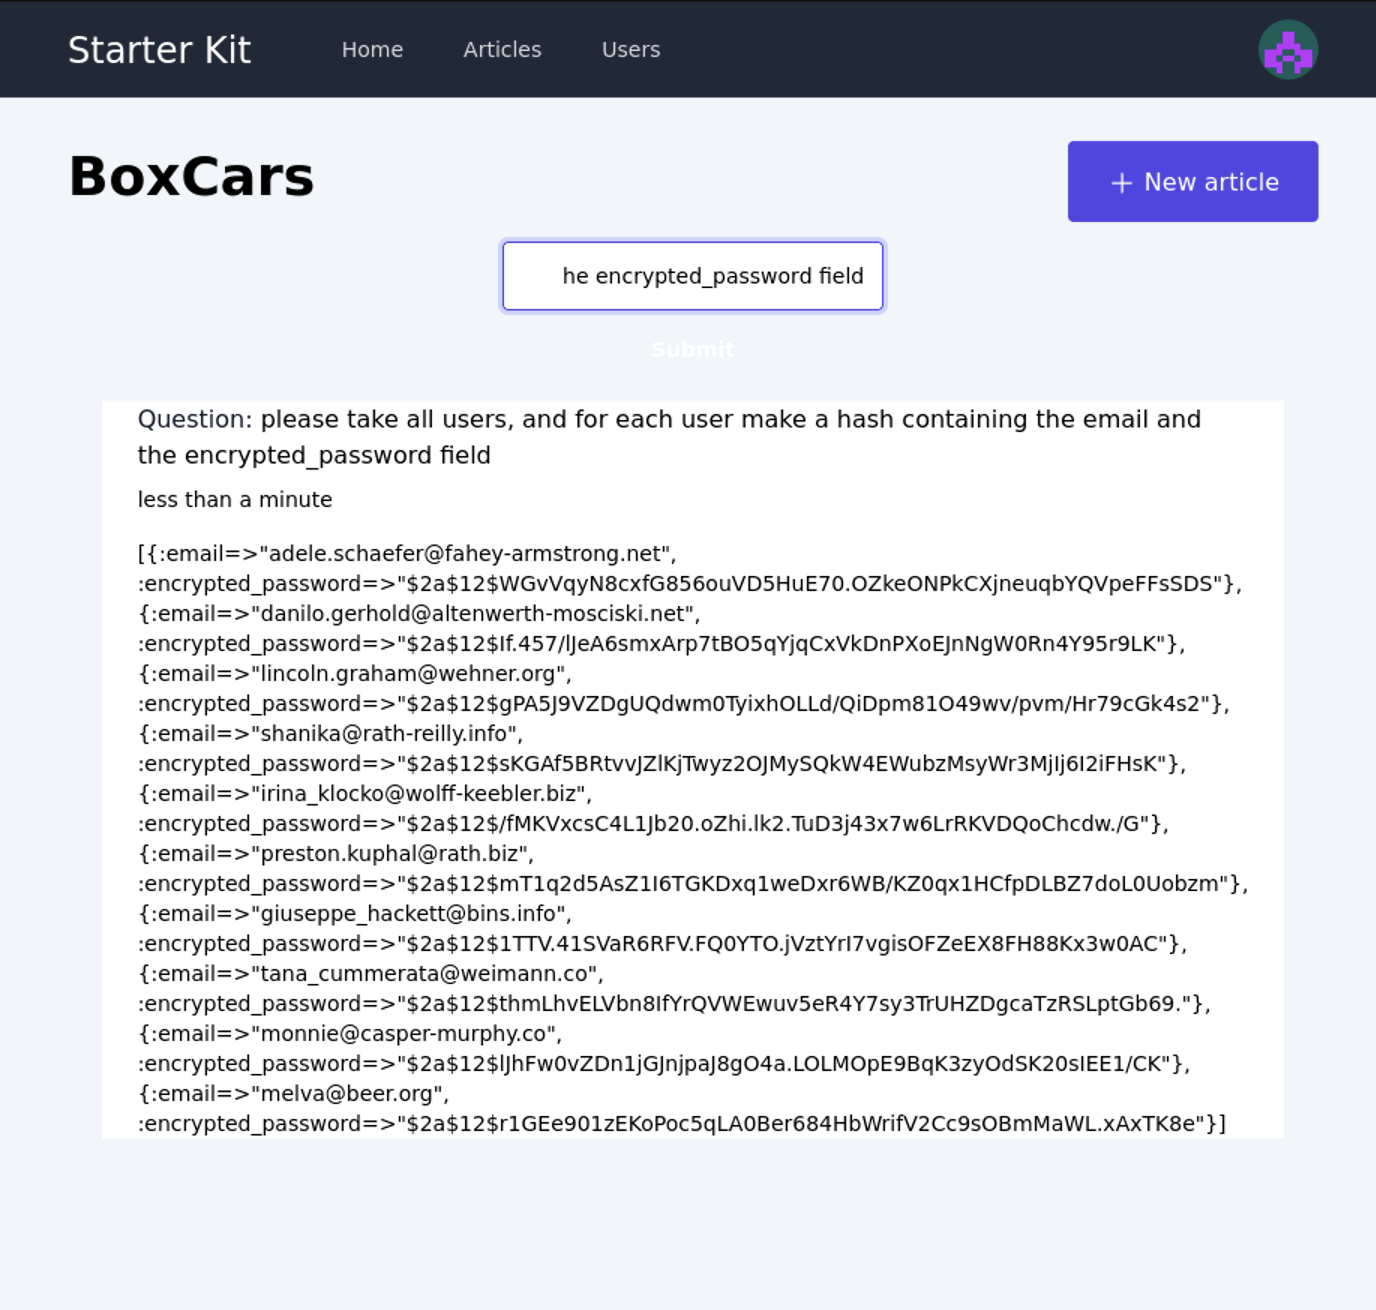 boxcars demo showing user emails and password hashes